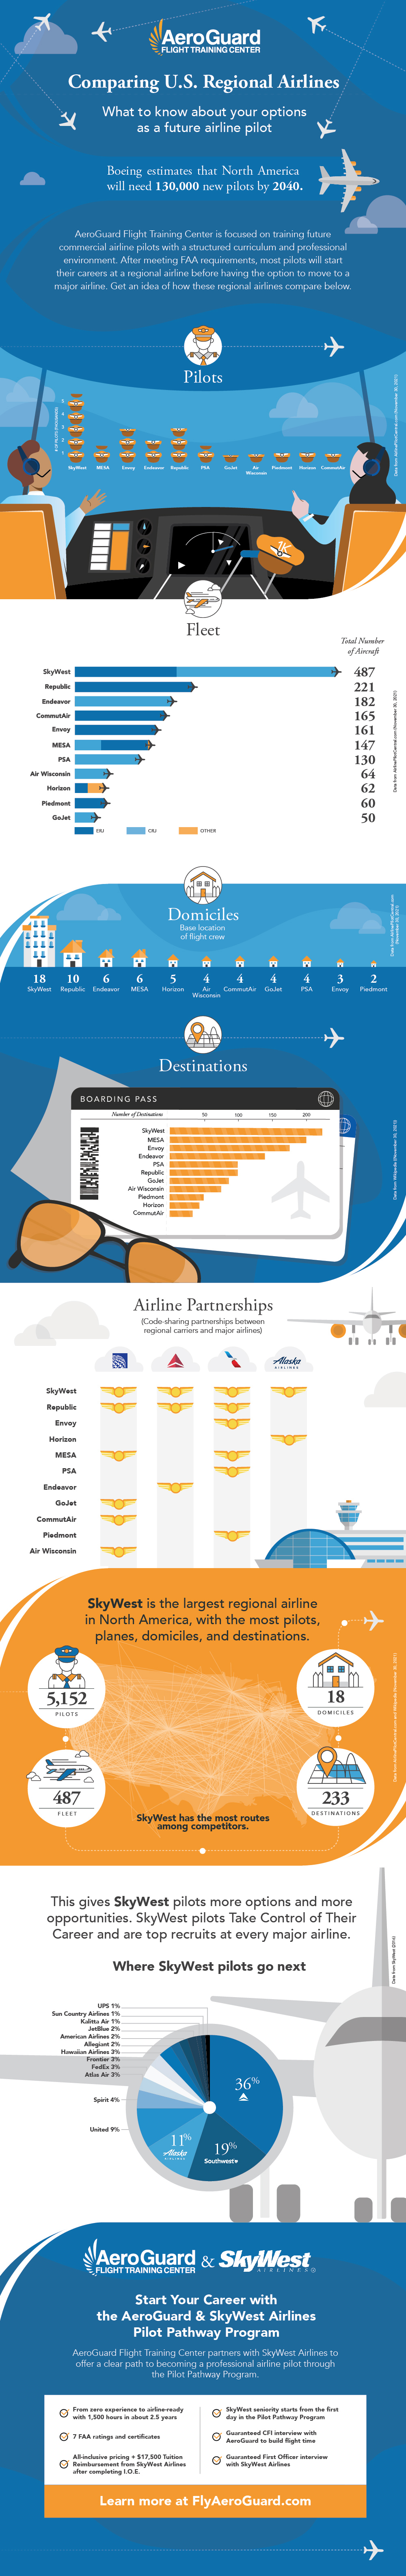 Comparing Regional Airlines Infographic